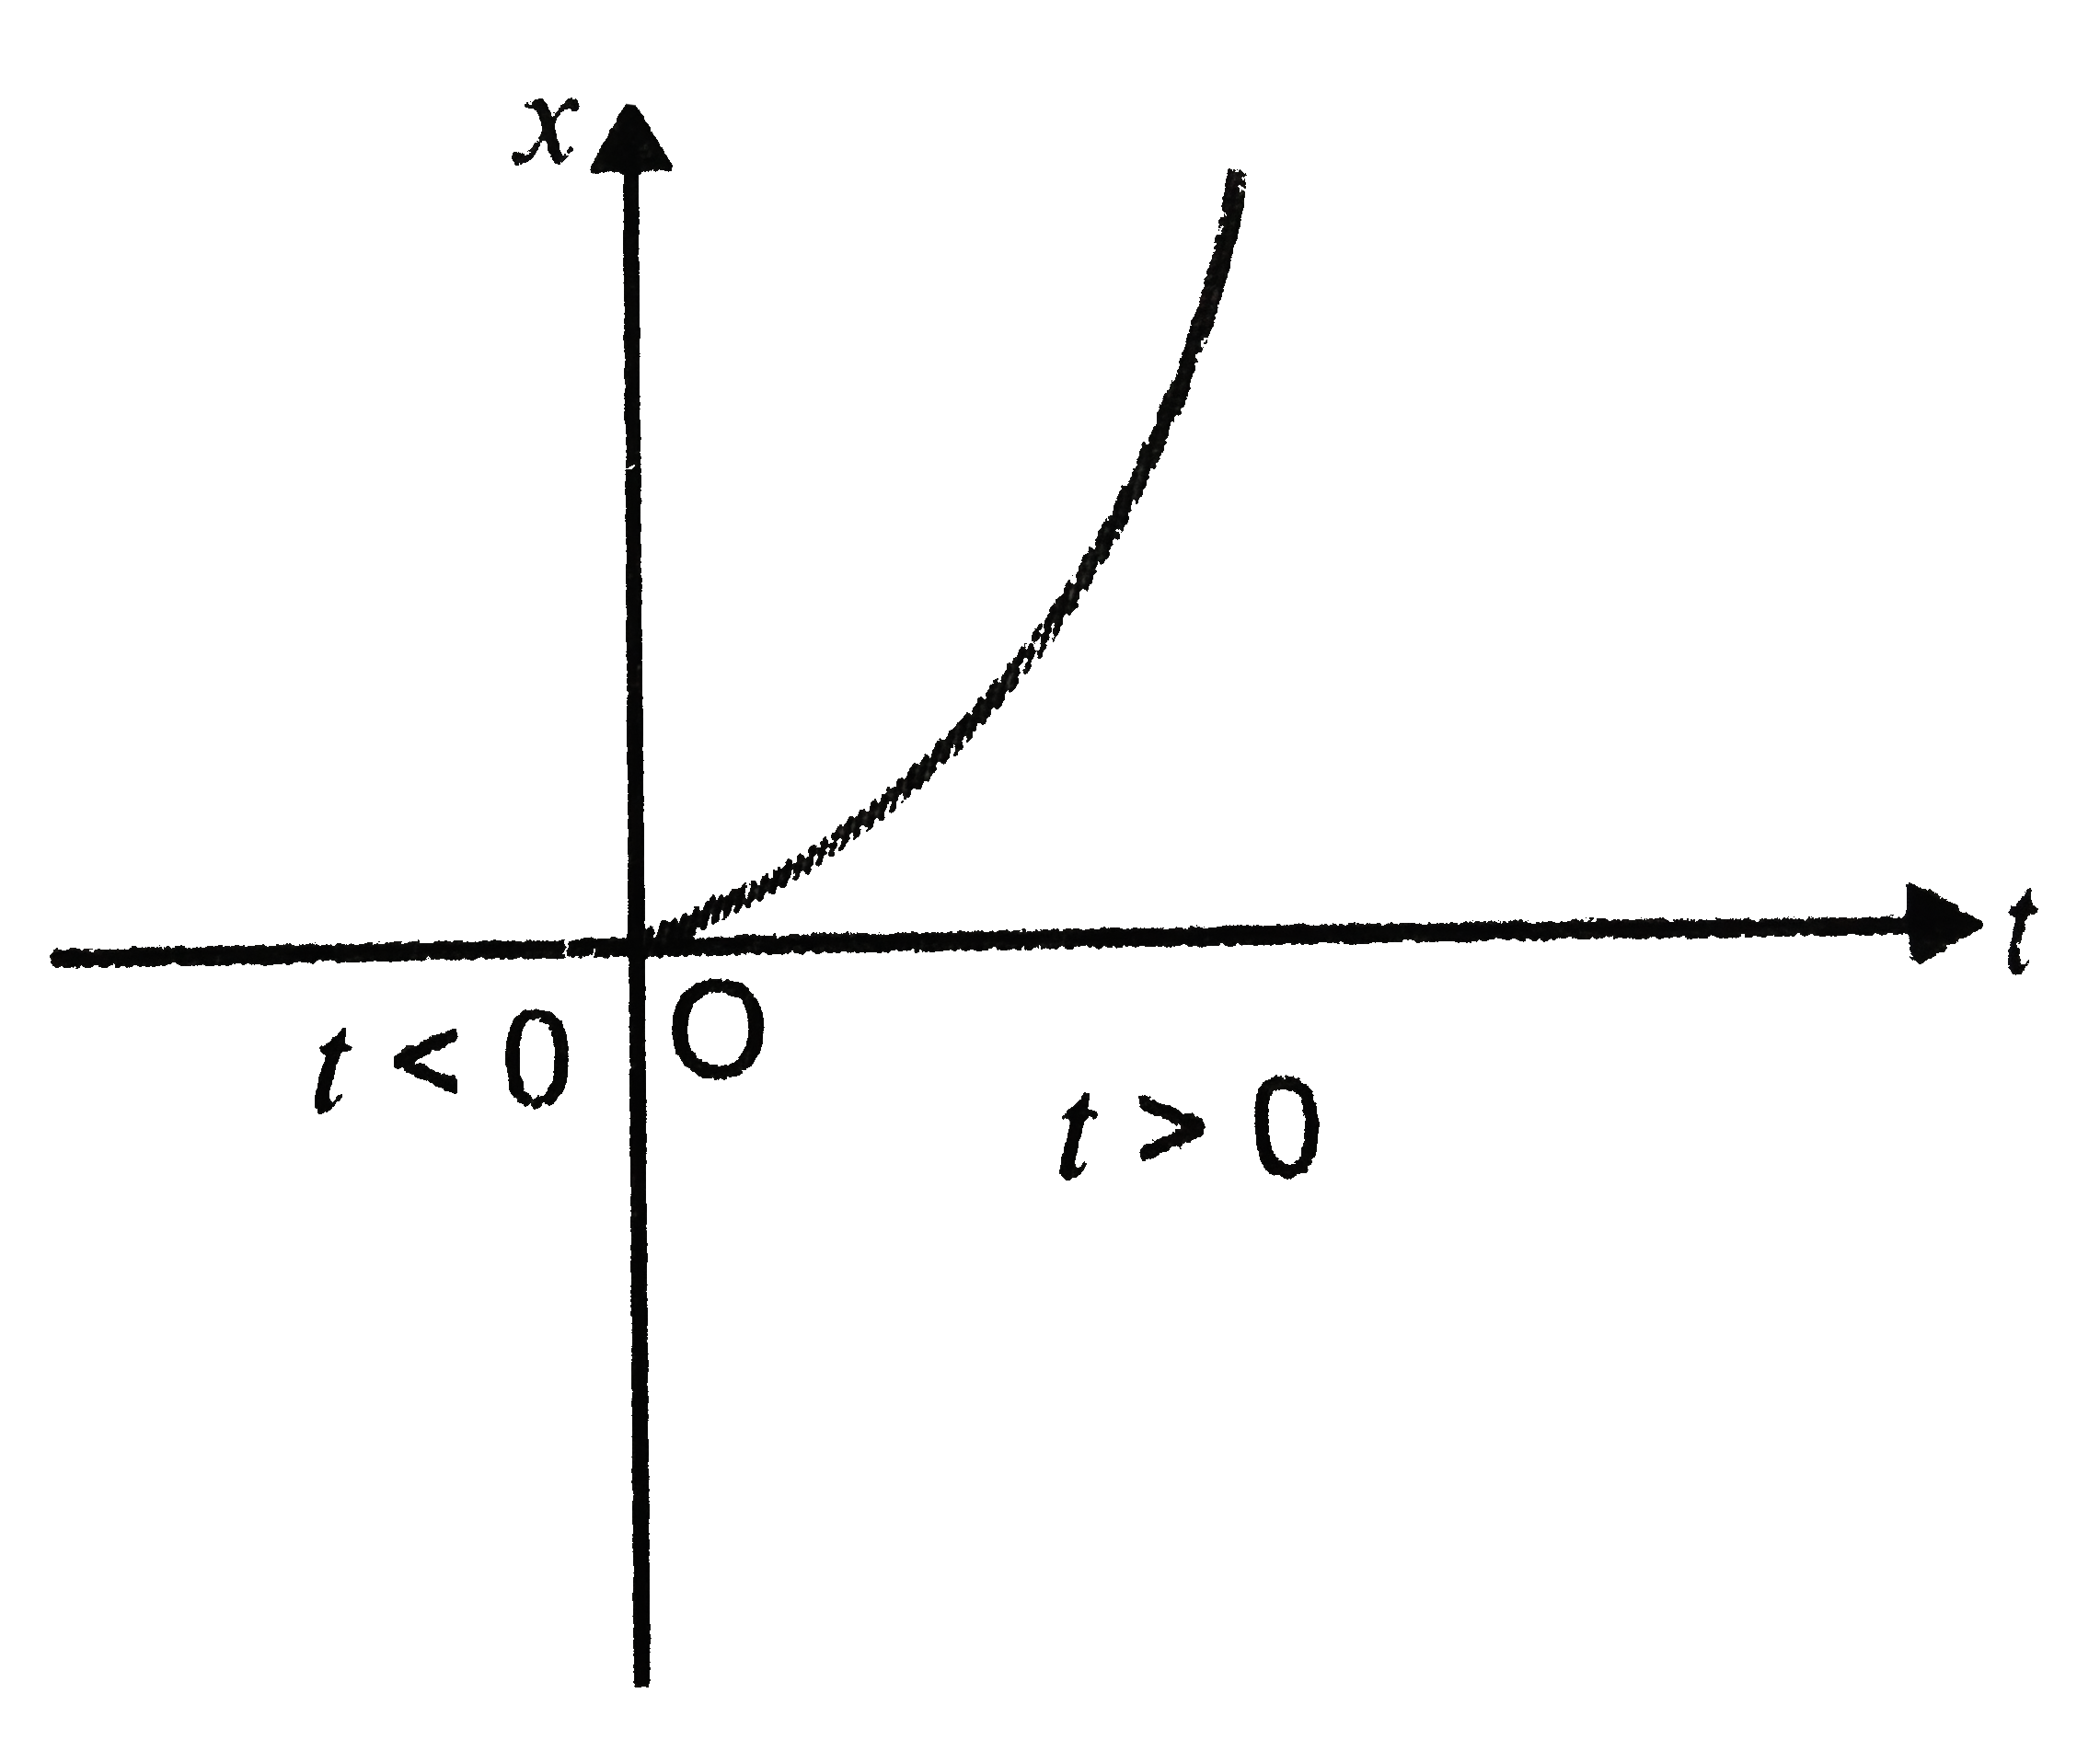 Fig. 2 (NCT). 6 shows  x-t plot of one dismensional motion a particle. Is it correct to say from the graph that the particle moves in a straight line for  t lt 0 and on a parabolic path form  t gt 0 ? If not, suggest a suitable physical contxt for this graph.